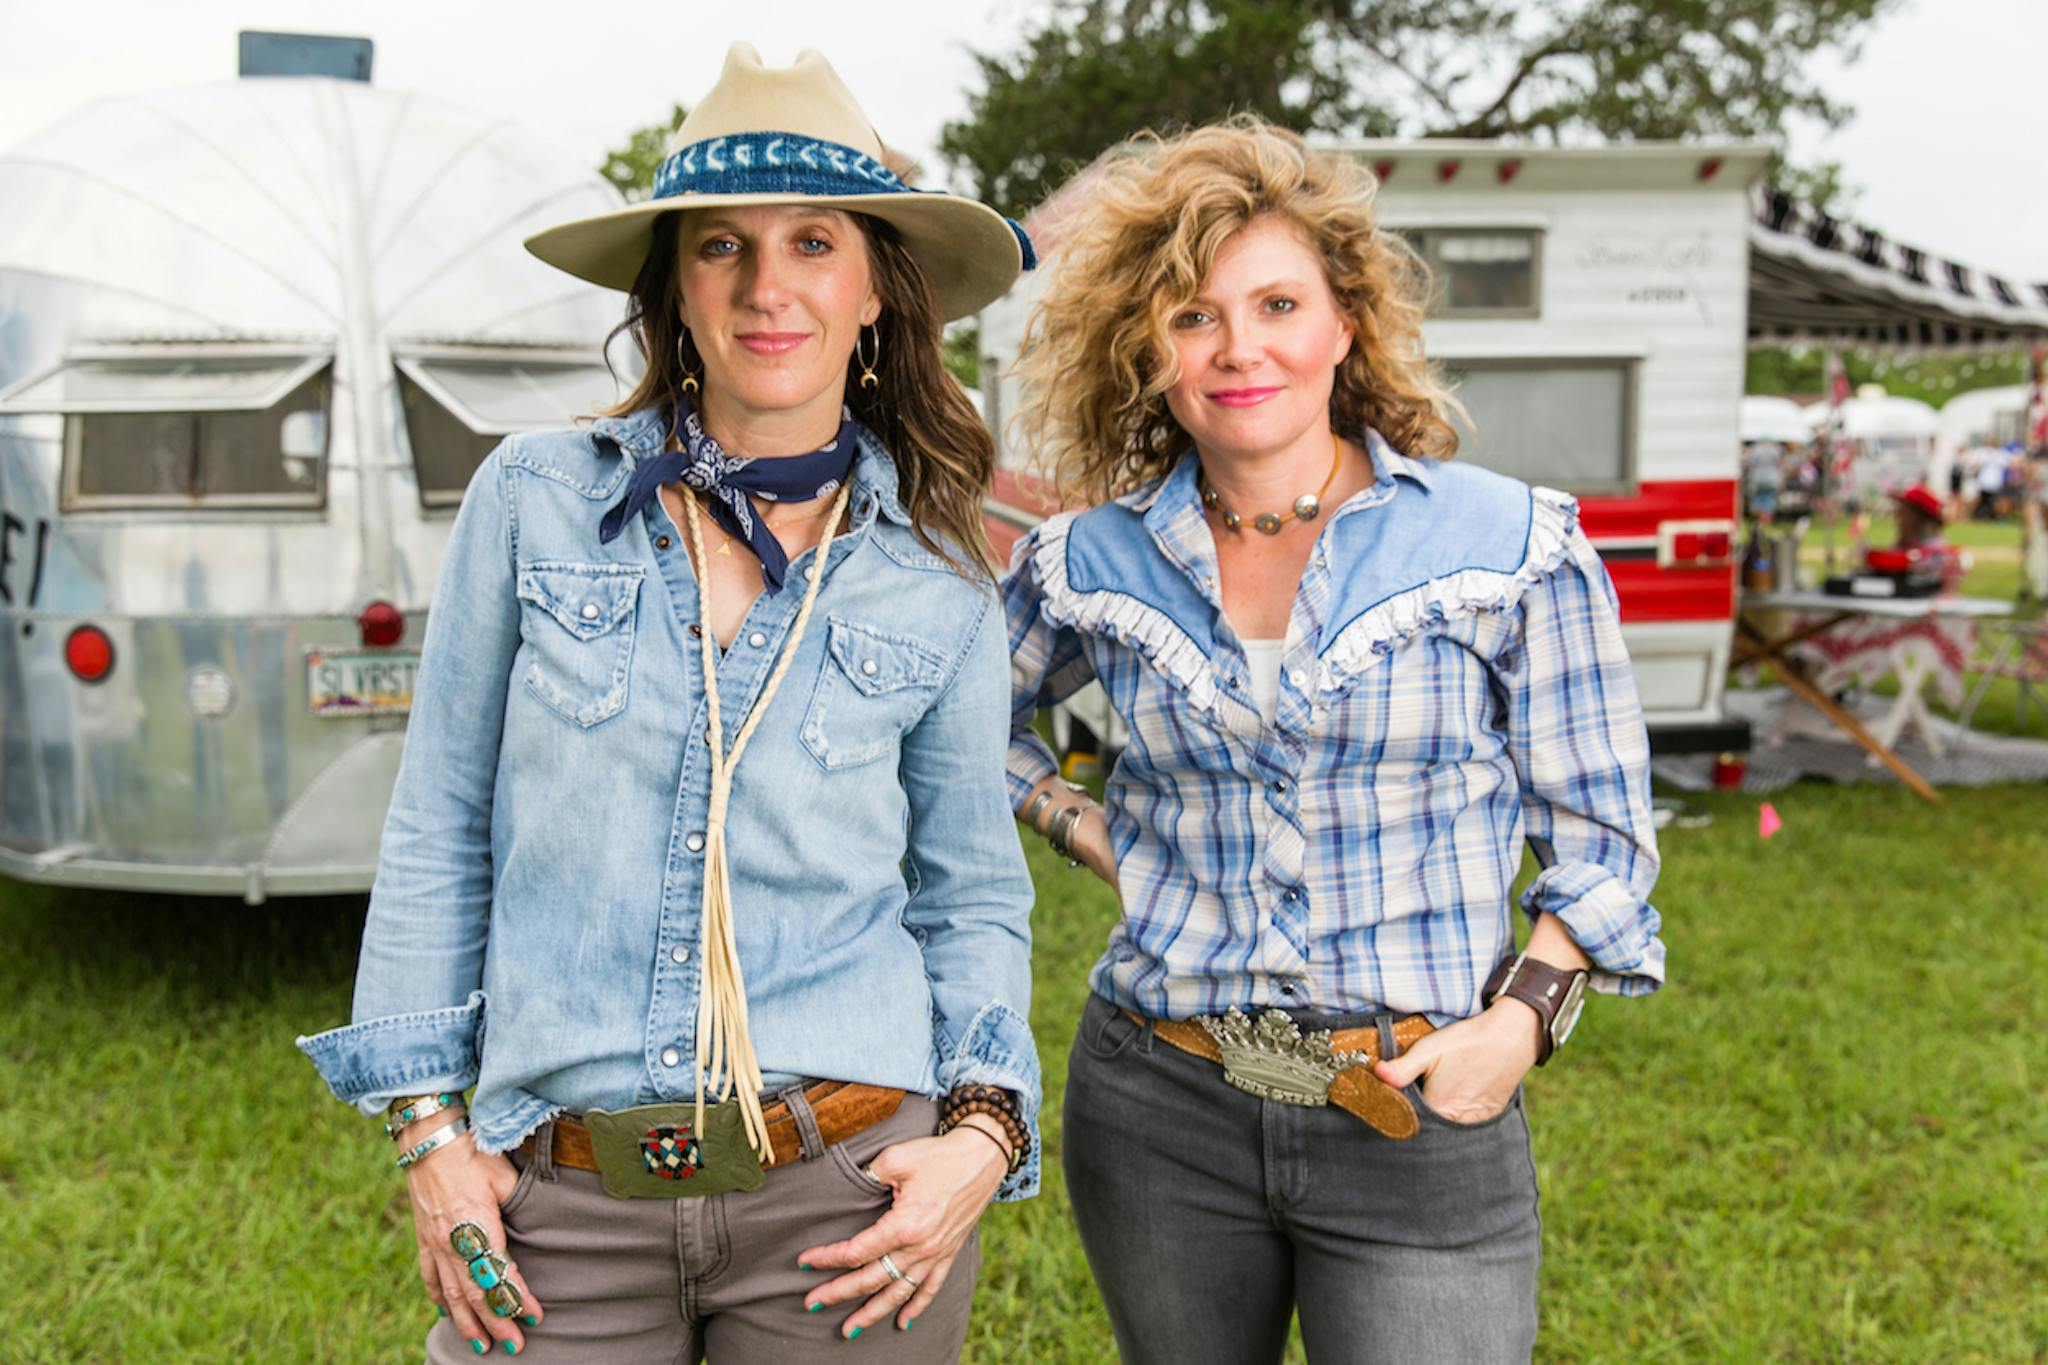 Jollie and Amie Sikes stand together in jeans and button downs.